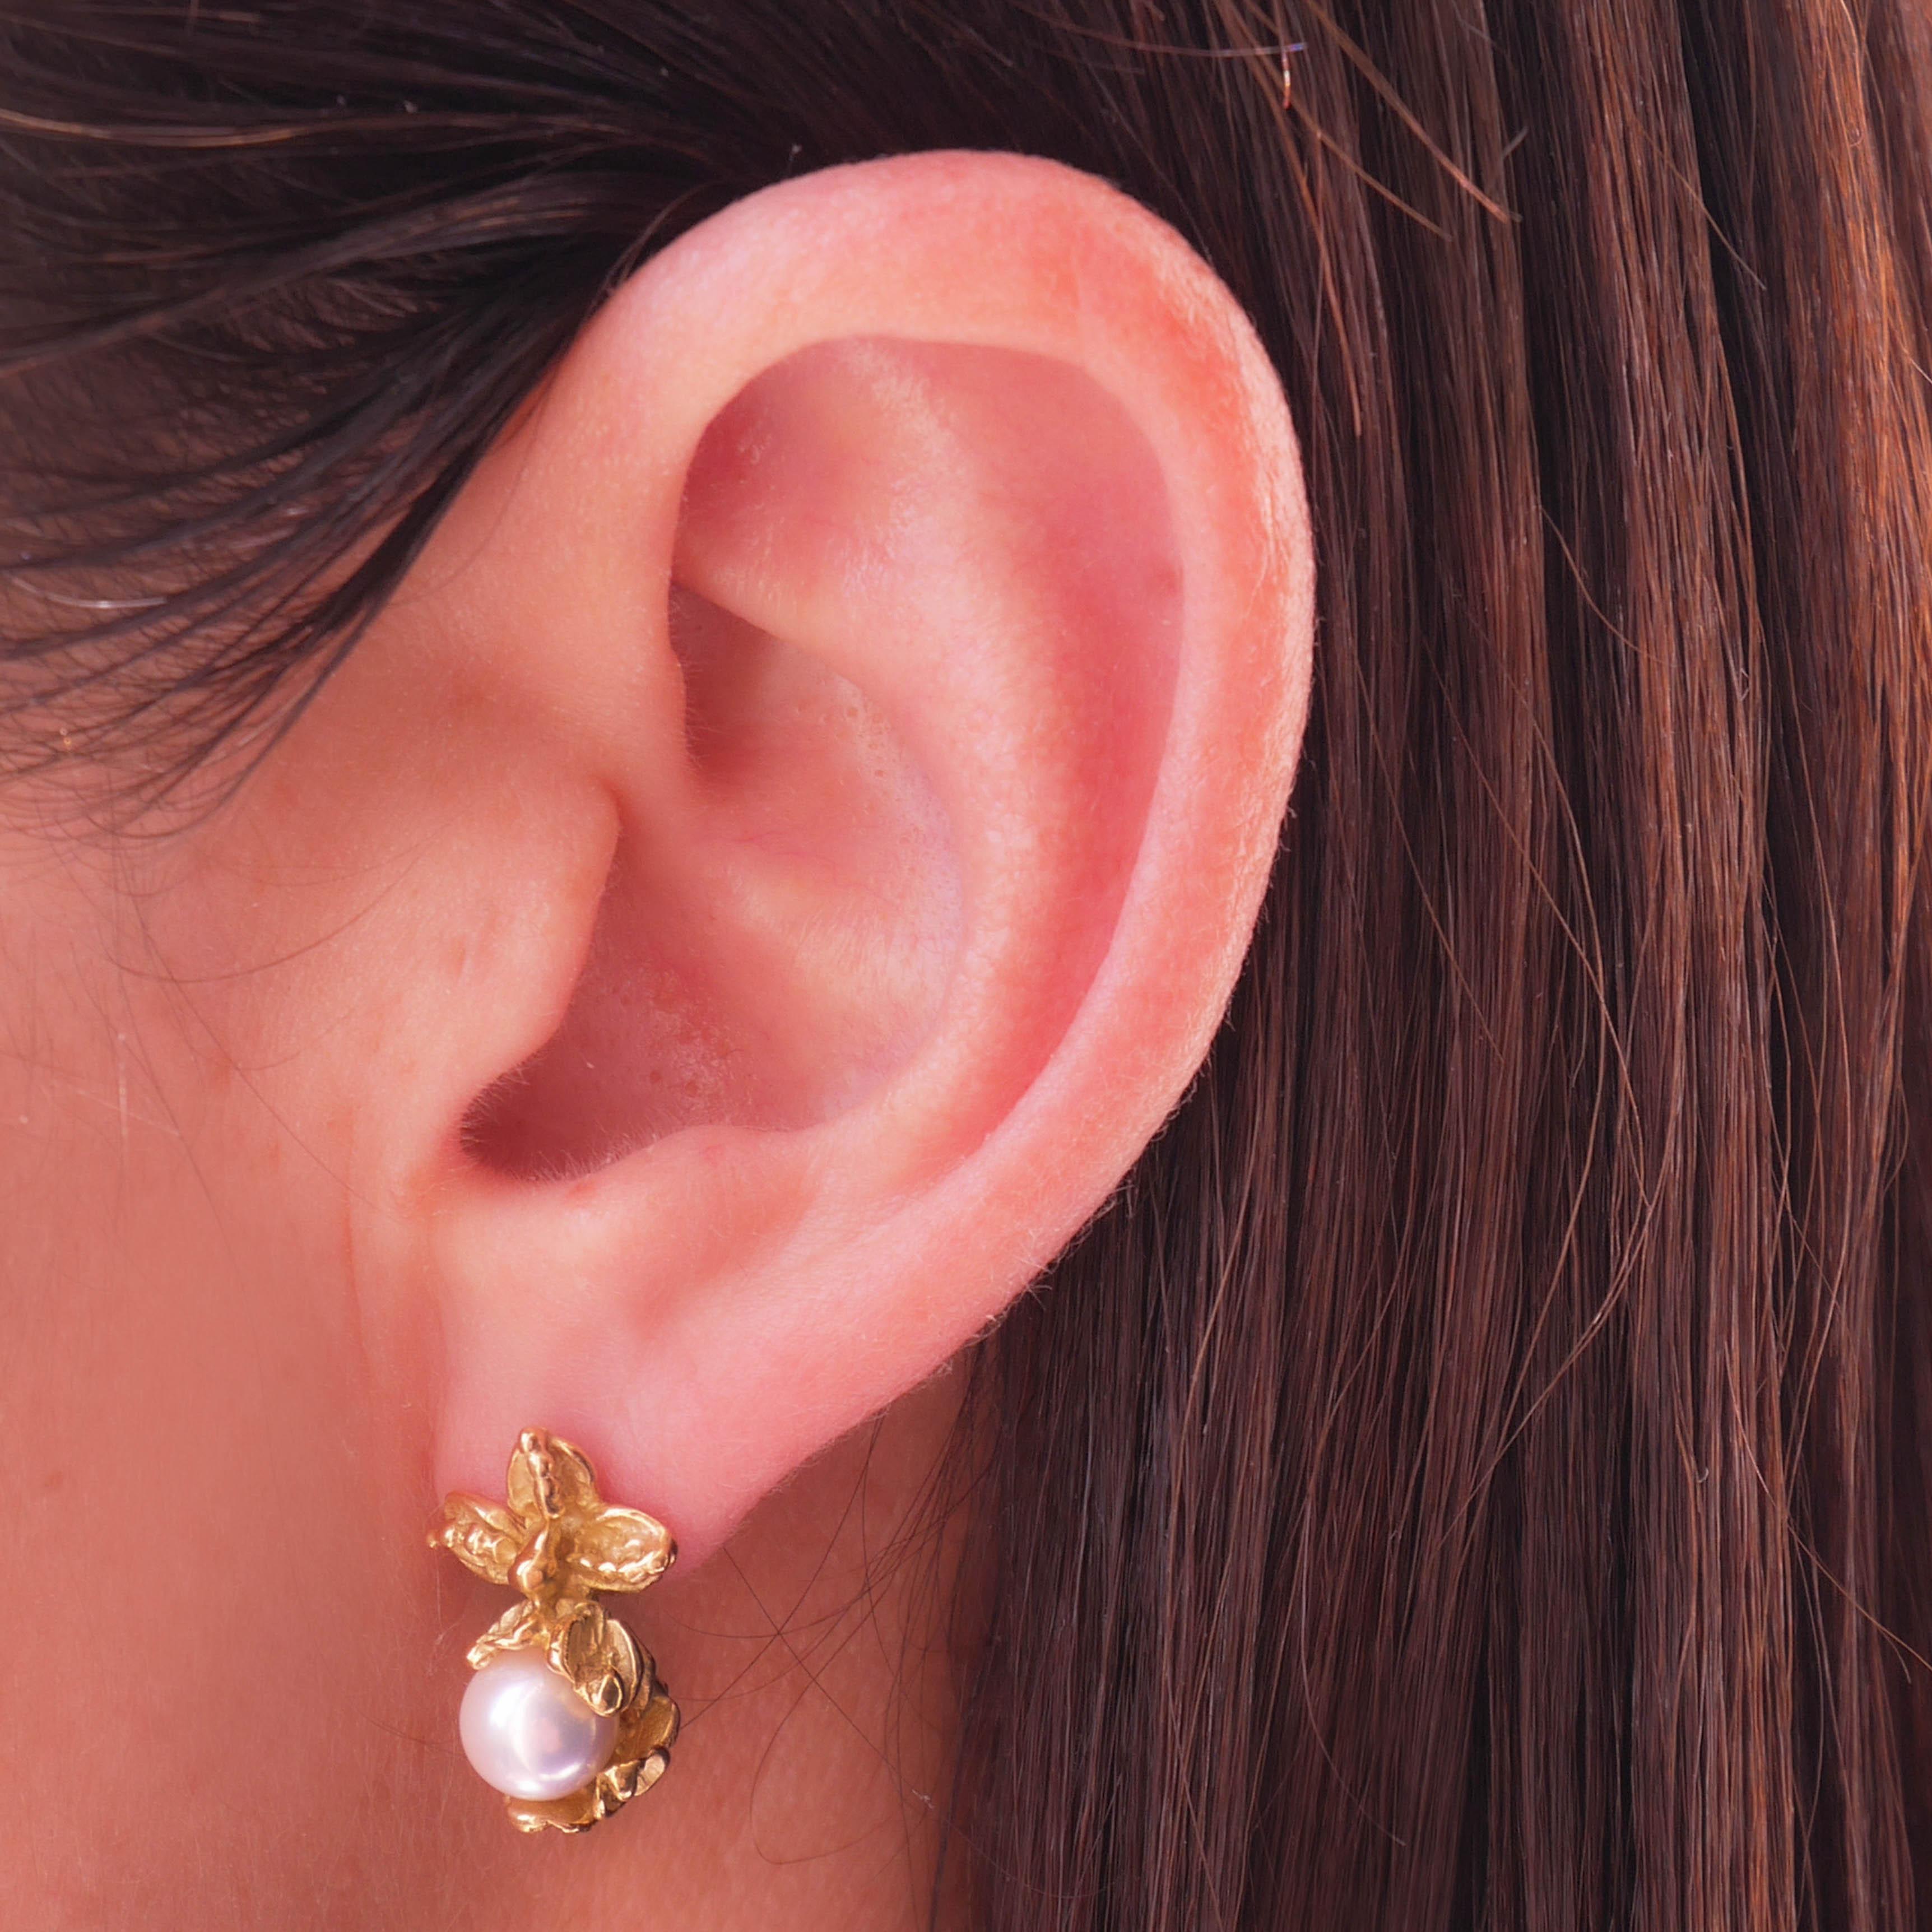 Handcrafted earrings in 18 karat yellow gold weigh app. 3grm. The earrings are each set with a lustrous Akoya pearl, each leaf has been hand-engraved by using time-honored techniques. 
Bell-back Alpa fastening for pierced ears.
The craftsmanship is